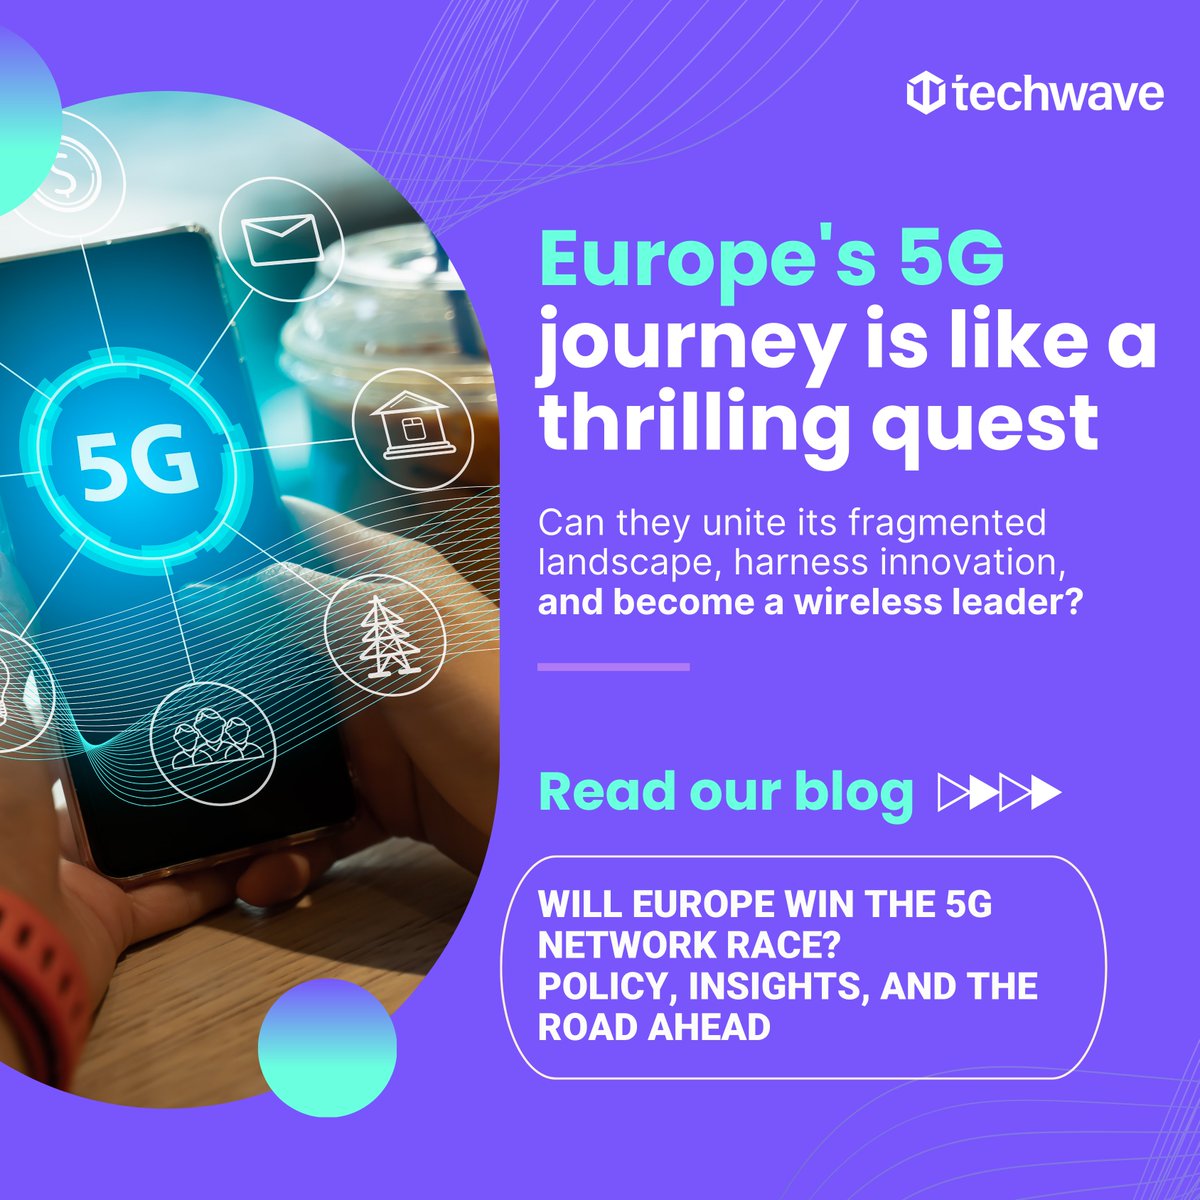 Europe's 5G odyssey: fragmented, innovative, and full of potential. Can they unite and lead the next-gen wireless revolution? Read our blog to know more techwave.net/will-europe-wi… #techwave #Europe #5G #wireless #Connections #wirelessconnections #5GNetwork #network #empower